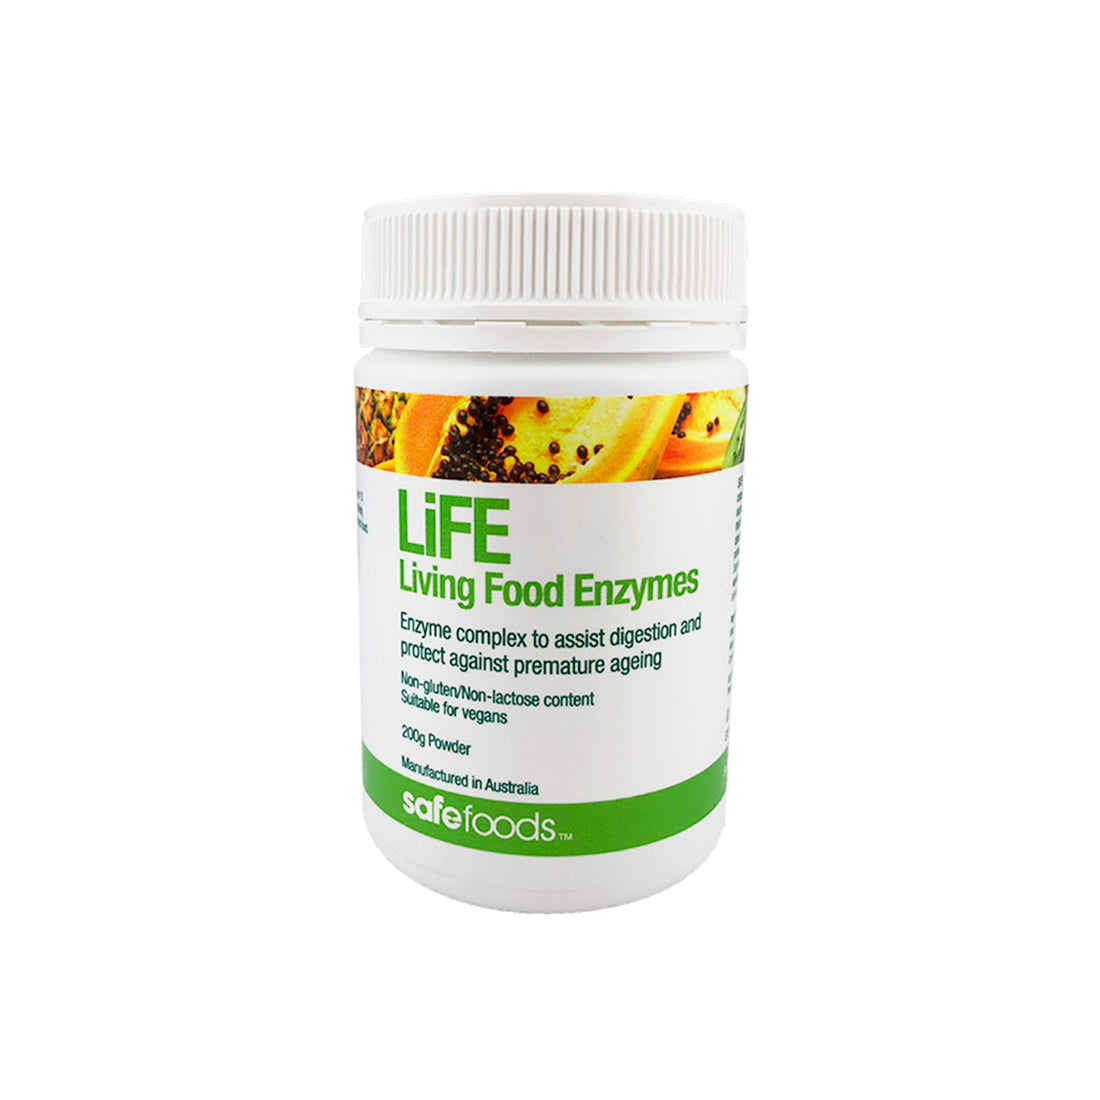 LiFE Living Food Enzymes 200g